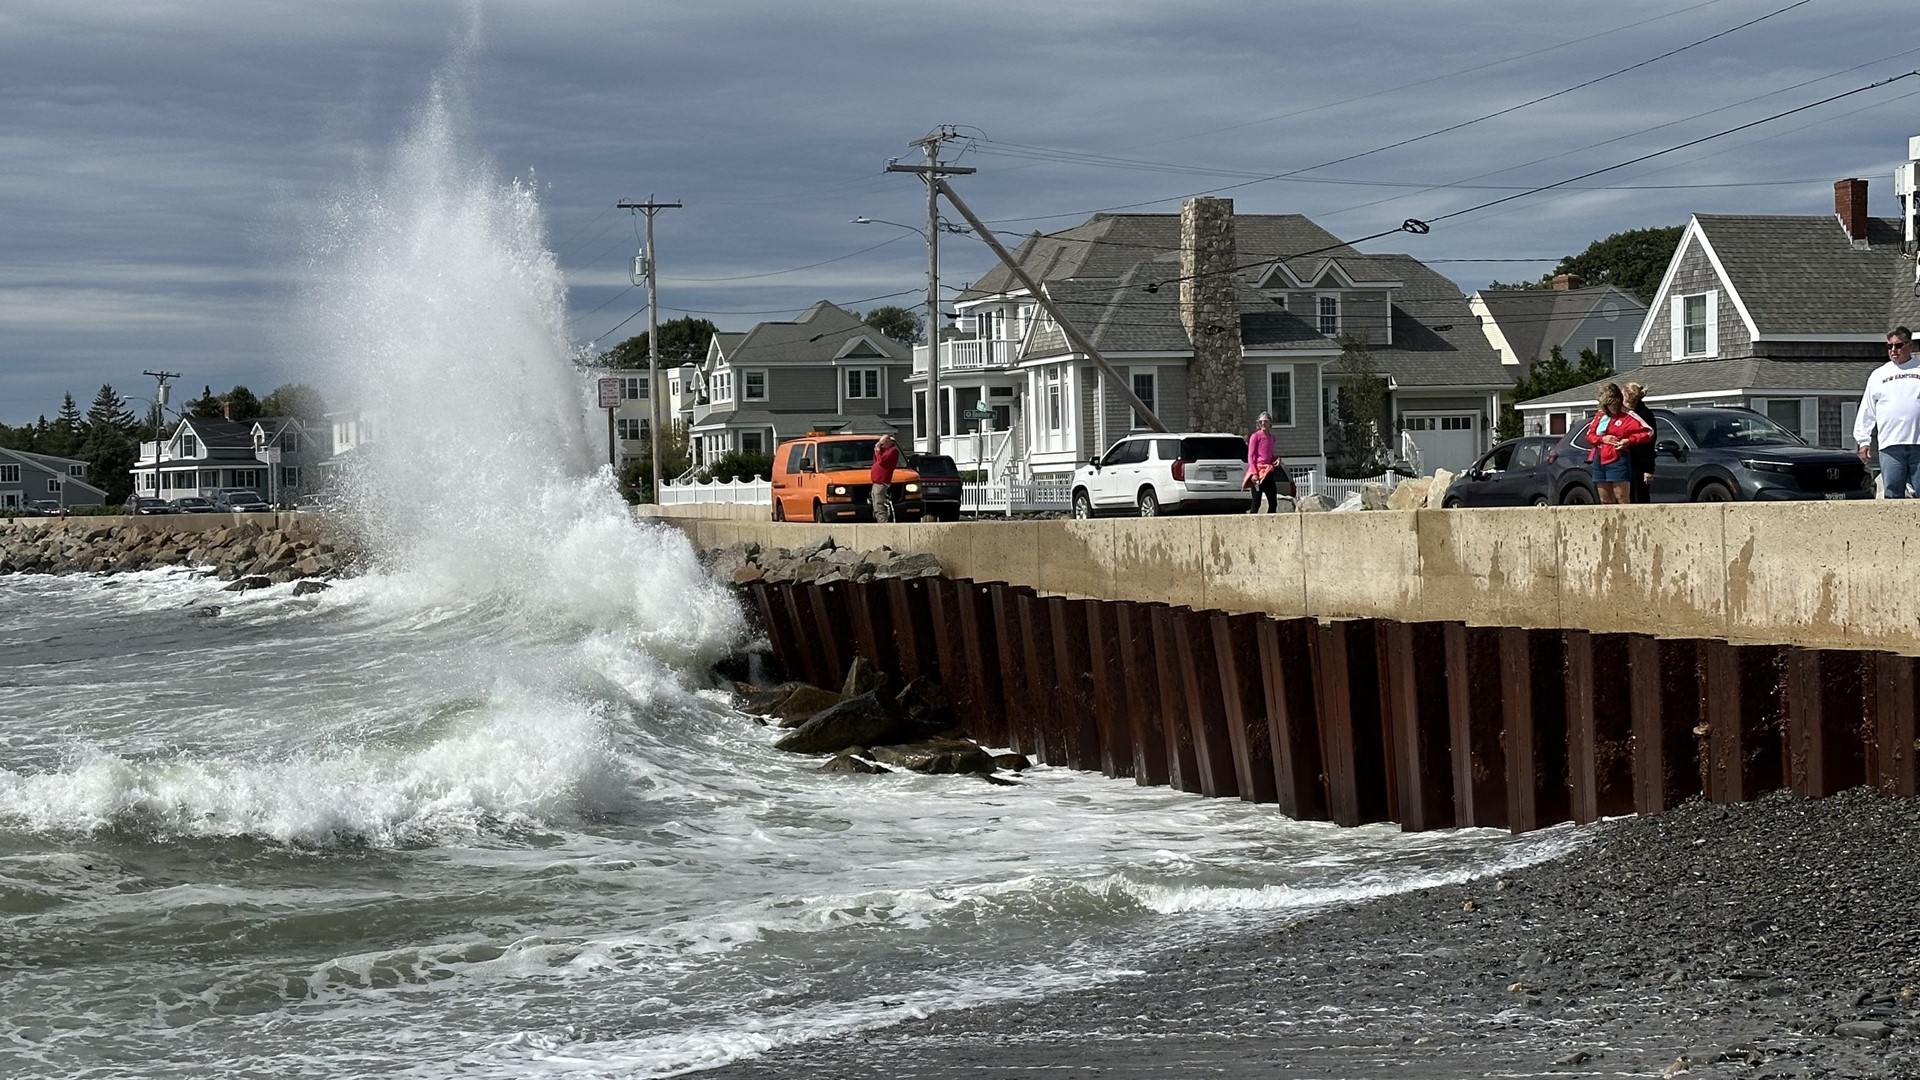 Waves were fierce and powerful but the sun was shining Saturday at Middle Beach in Kennebunk.